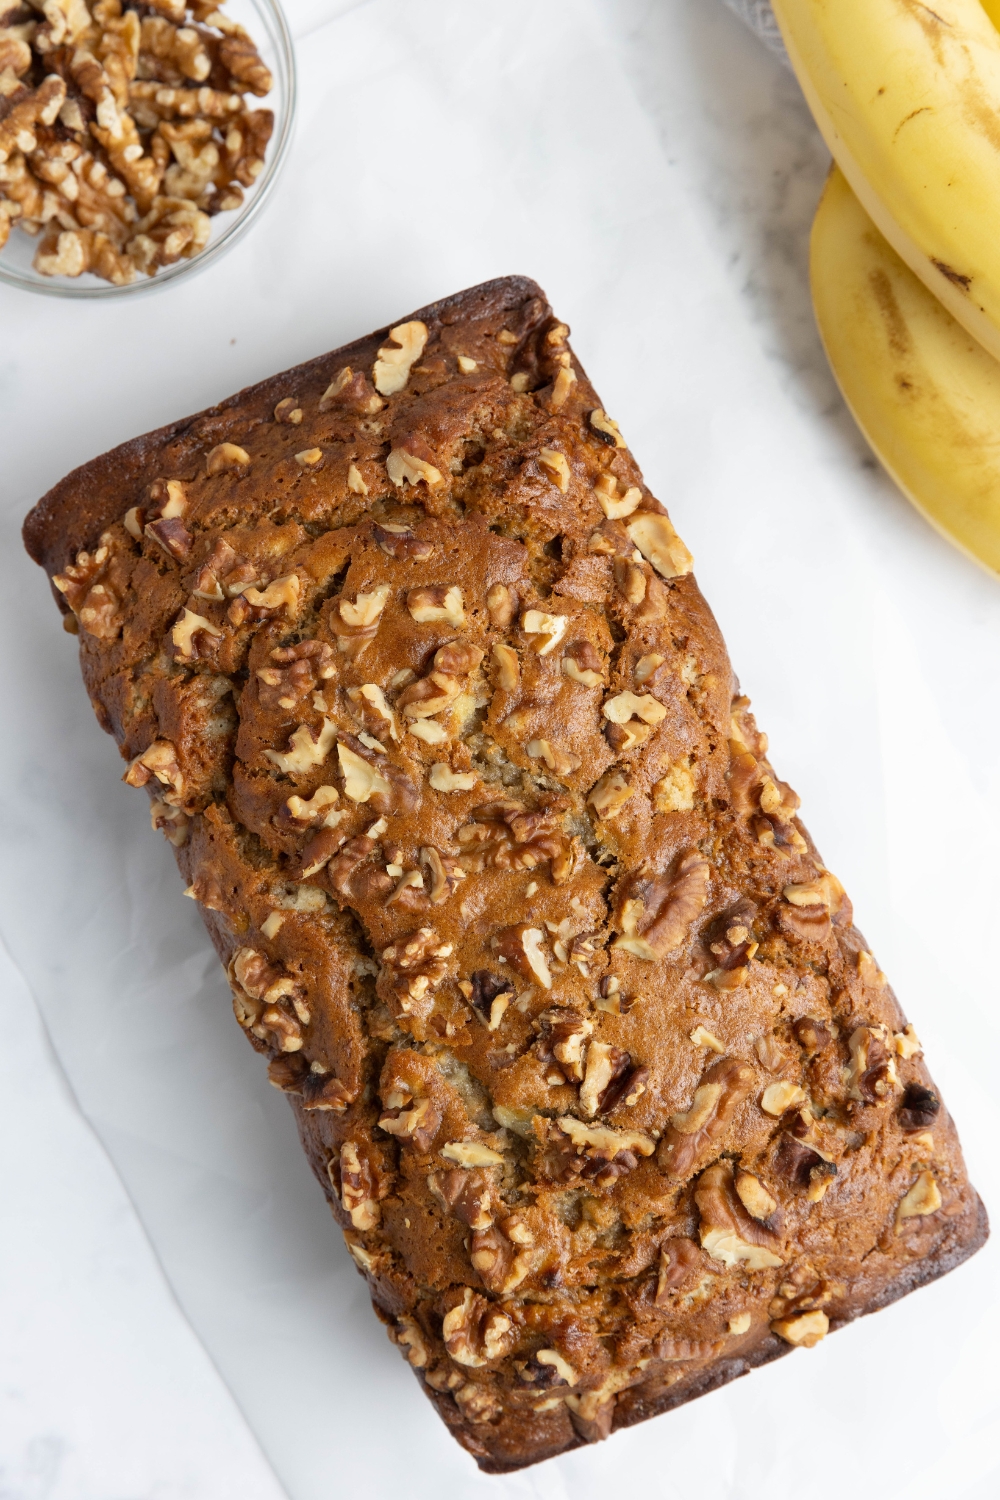 A loaf of banana bread topped with chopped walnuts.